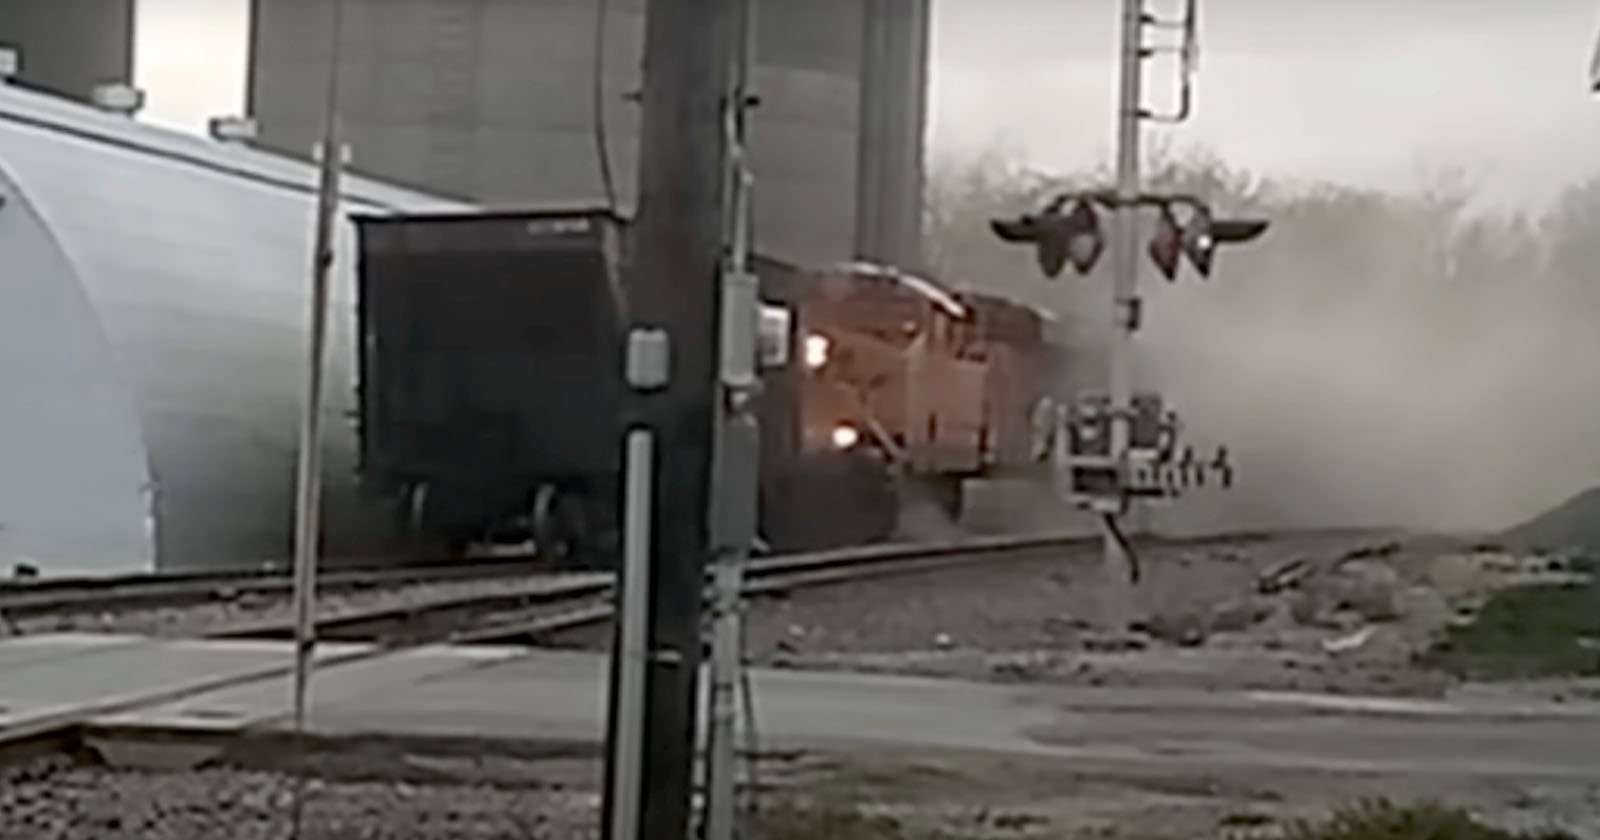 Teenager Accused of Causing Train Crash for YouTube Content